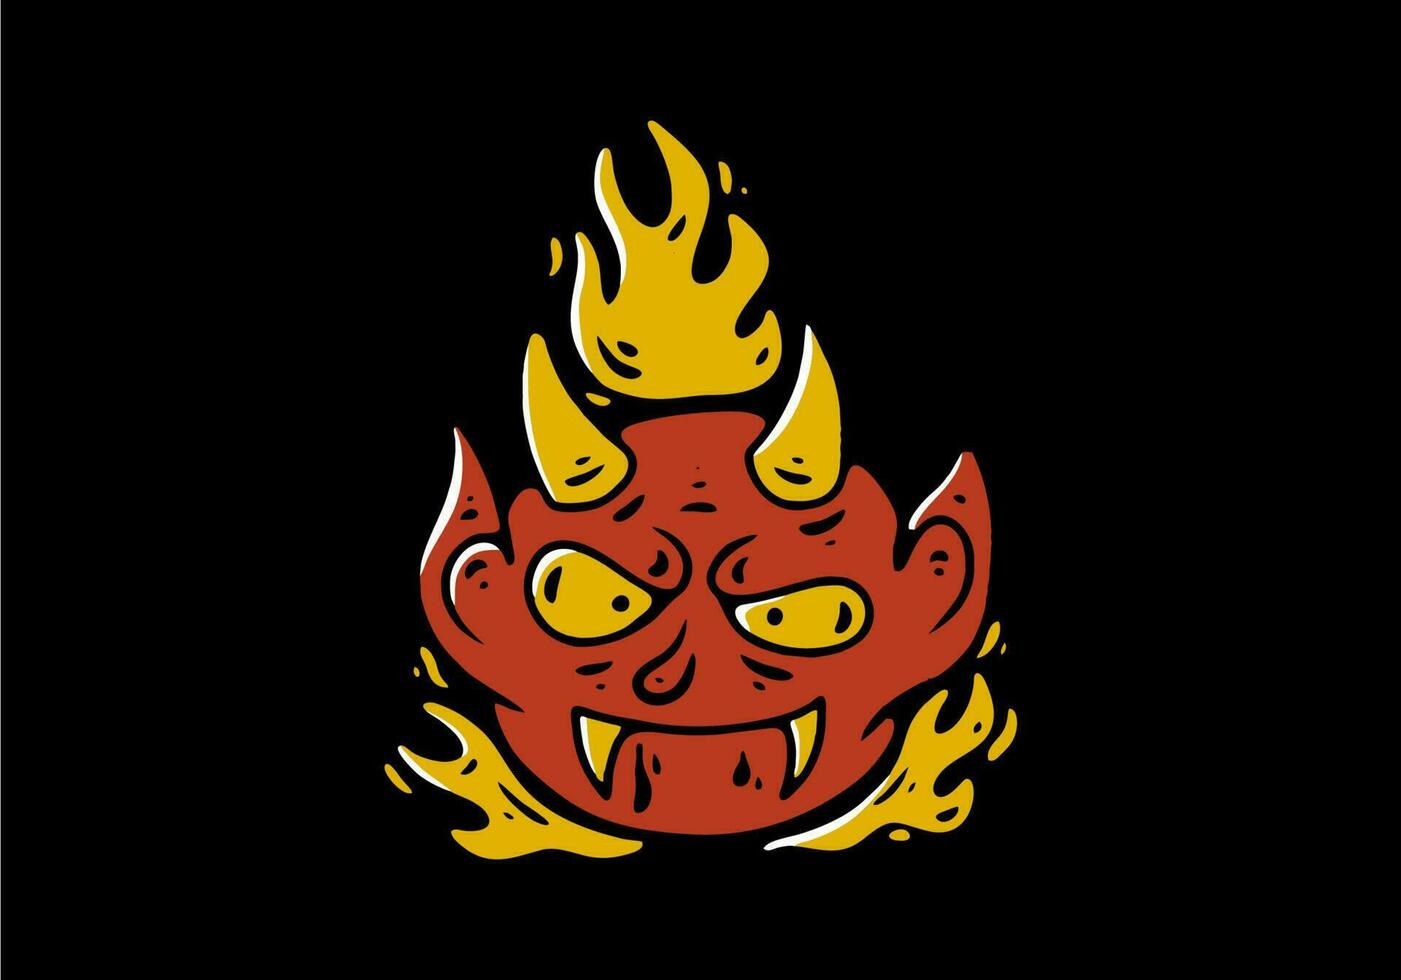 Illustration of a red devil with yellow flame vector